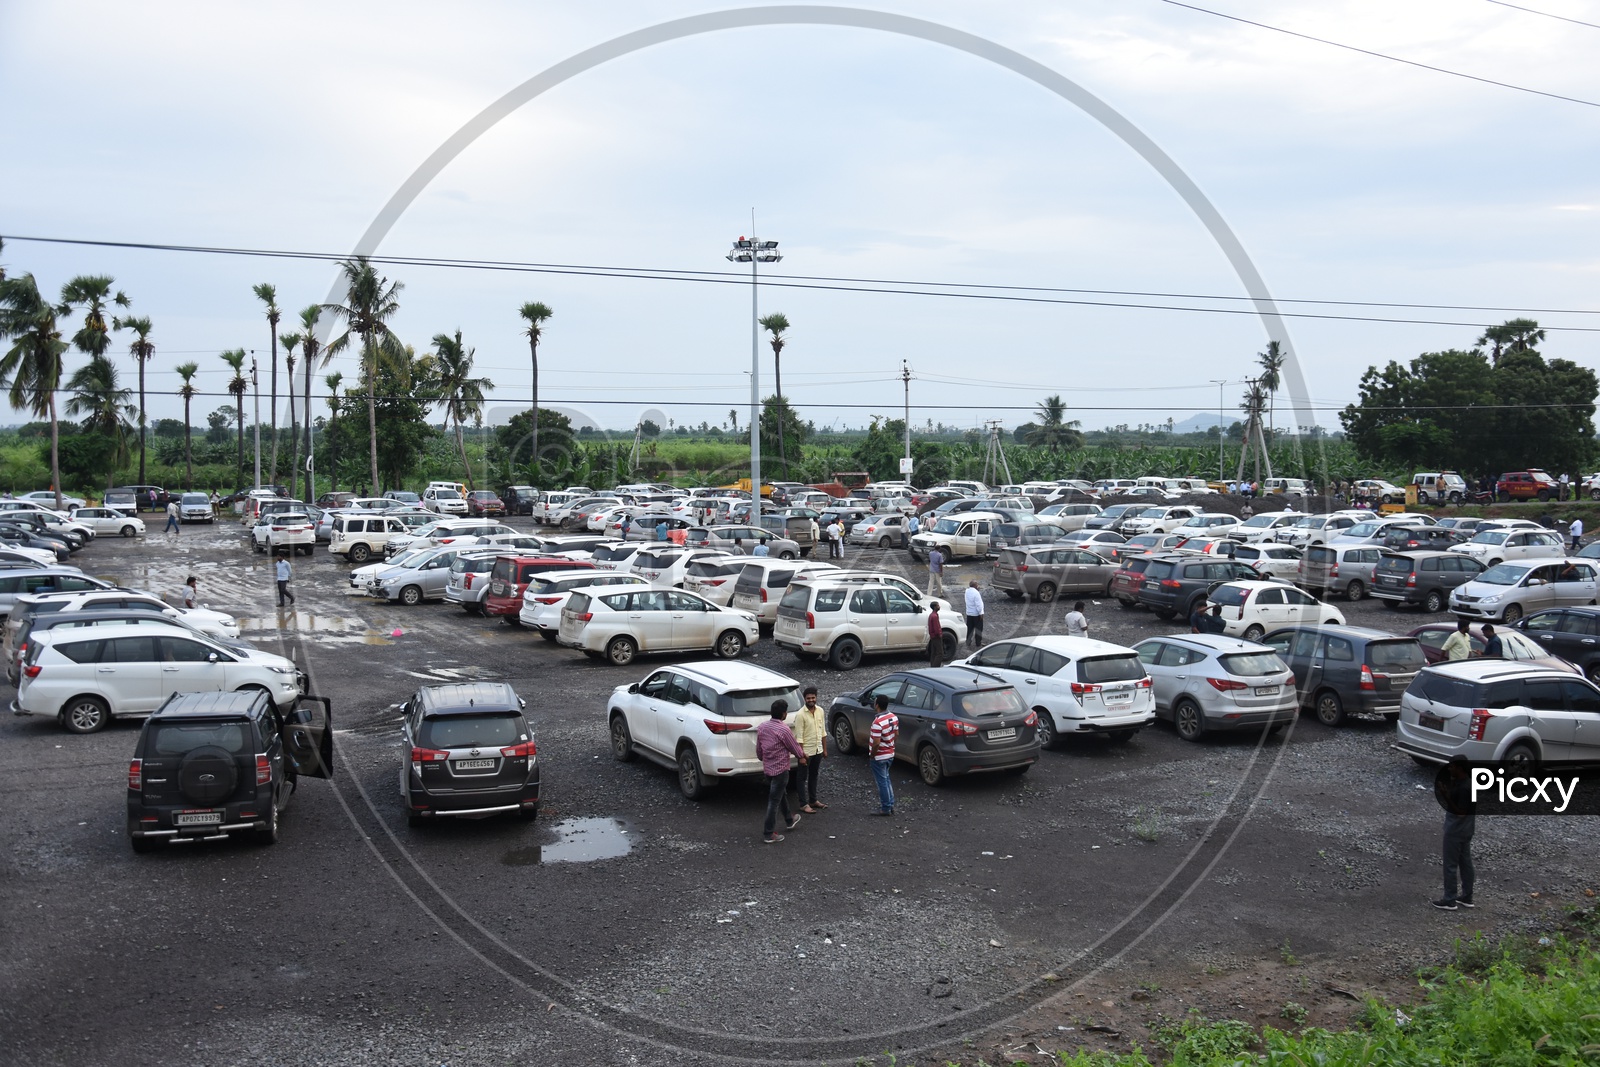 Cars Parked As a group At a Parking Lot